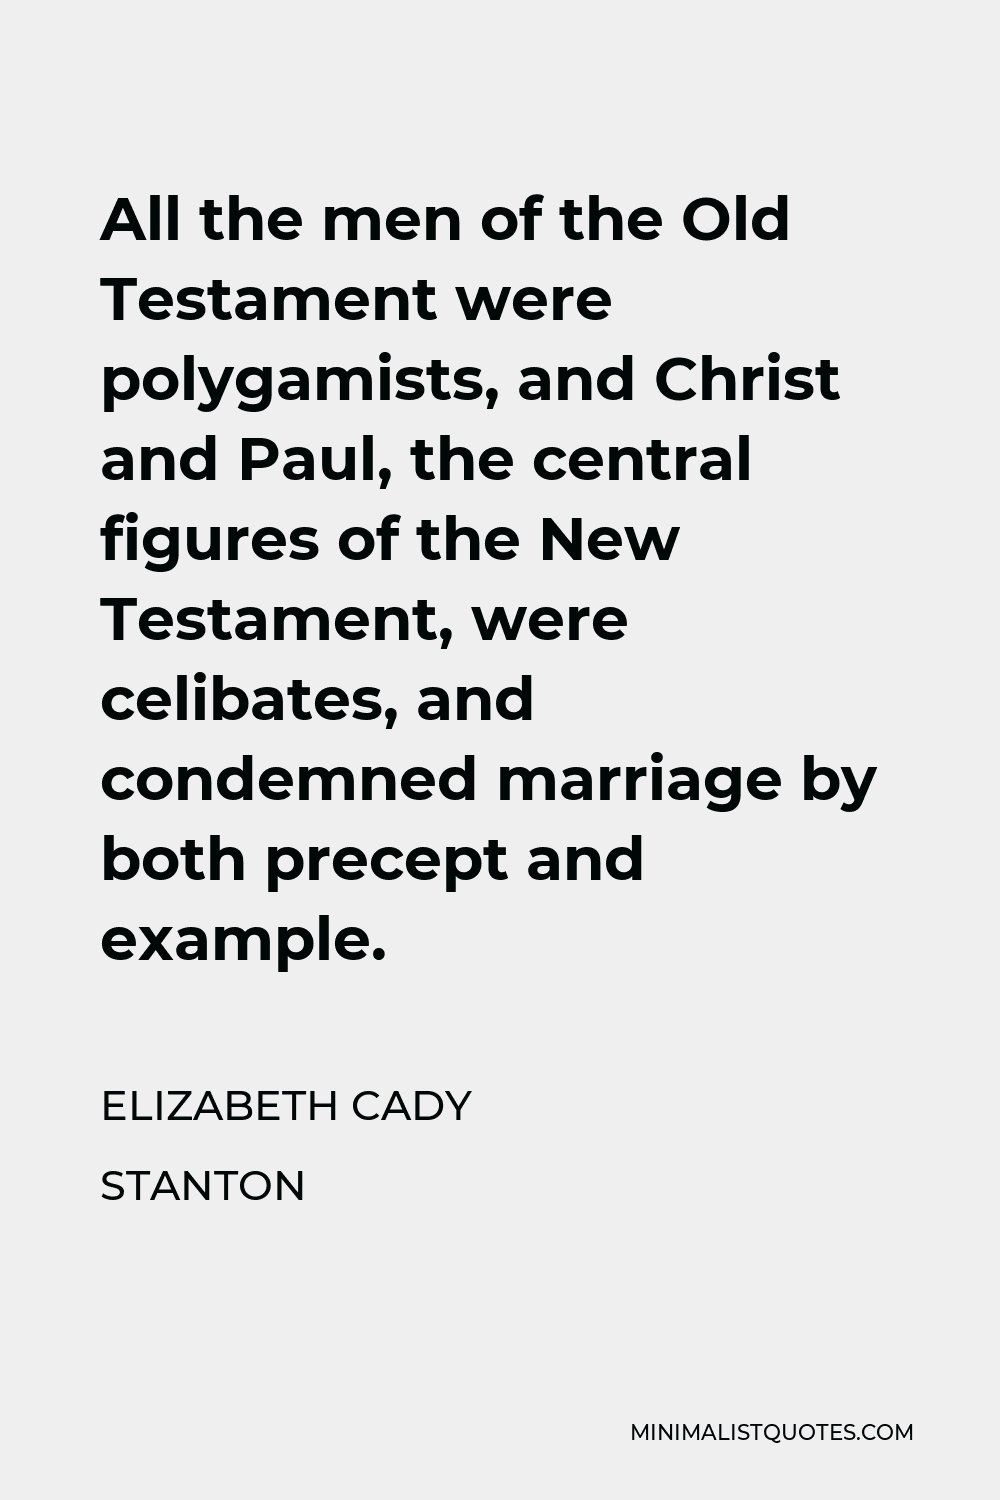 Elizabeth Cady Stanton Quote - All the men of the Old Testament were polygamists, and Christ and Paul, the central figures of the New Testament, were celibates, and condemned marriage by both precept and example.